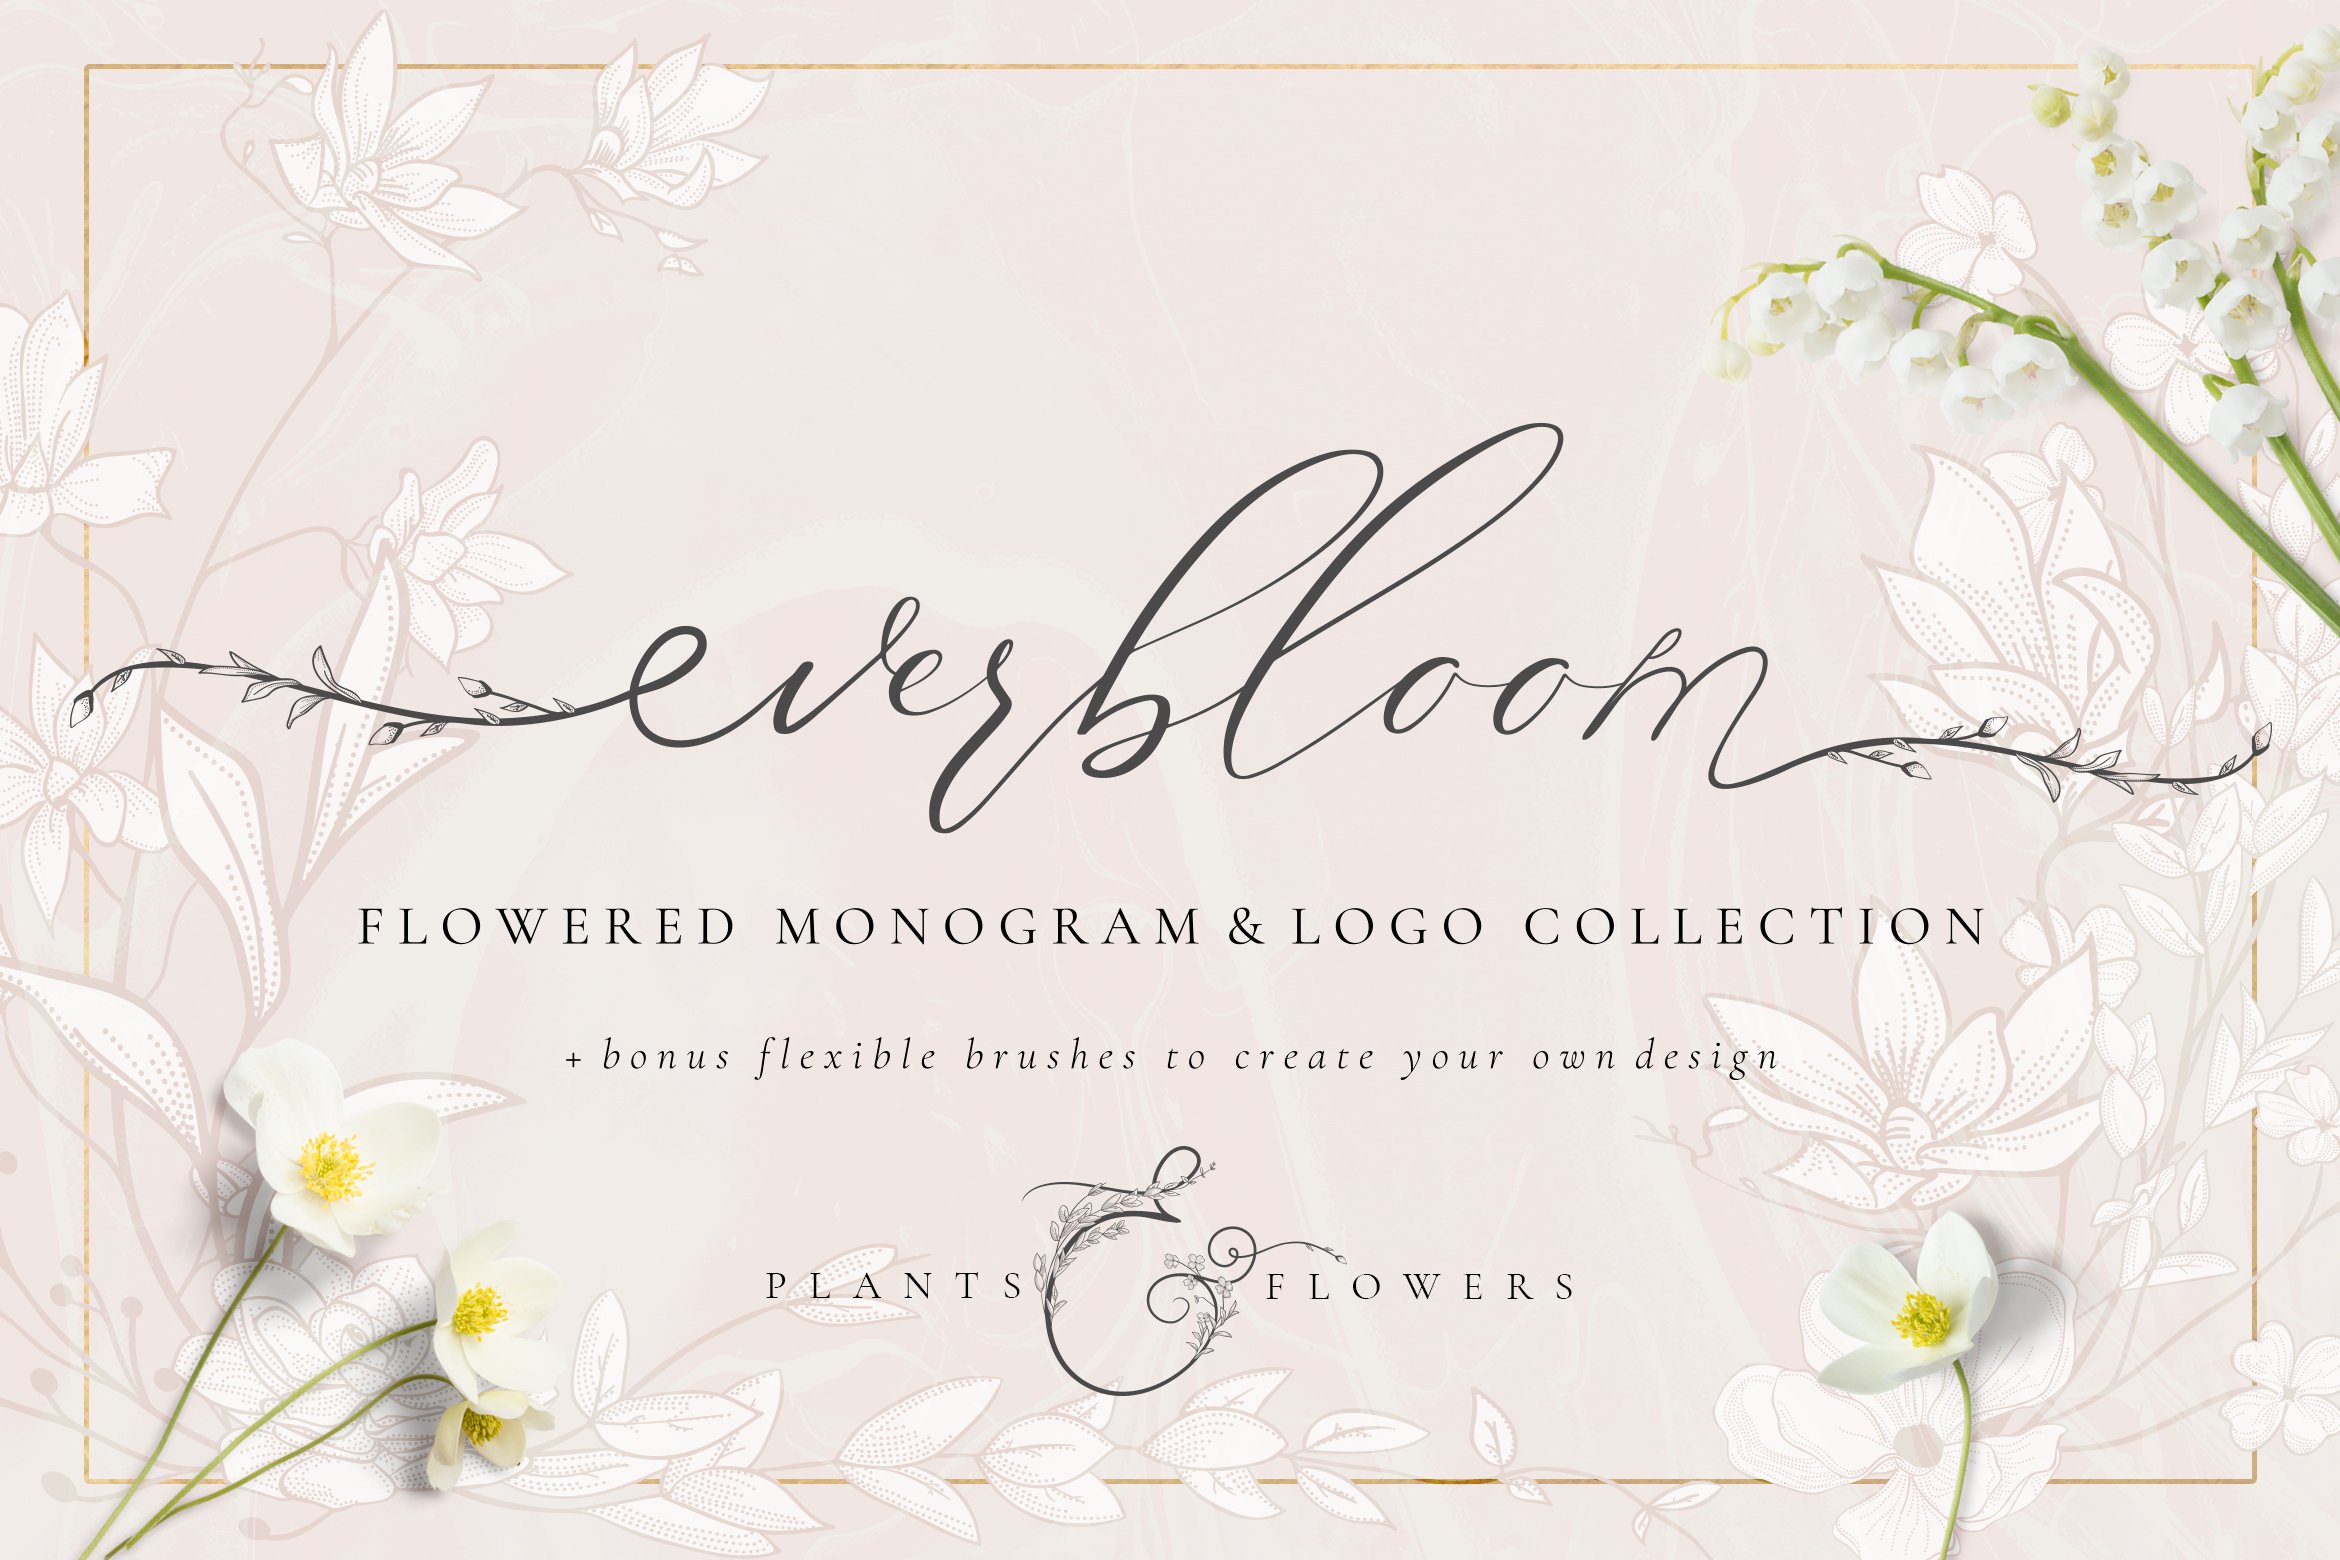 Flowered Monogram & Logo Collection cover image.